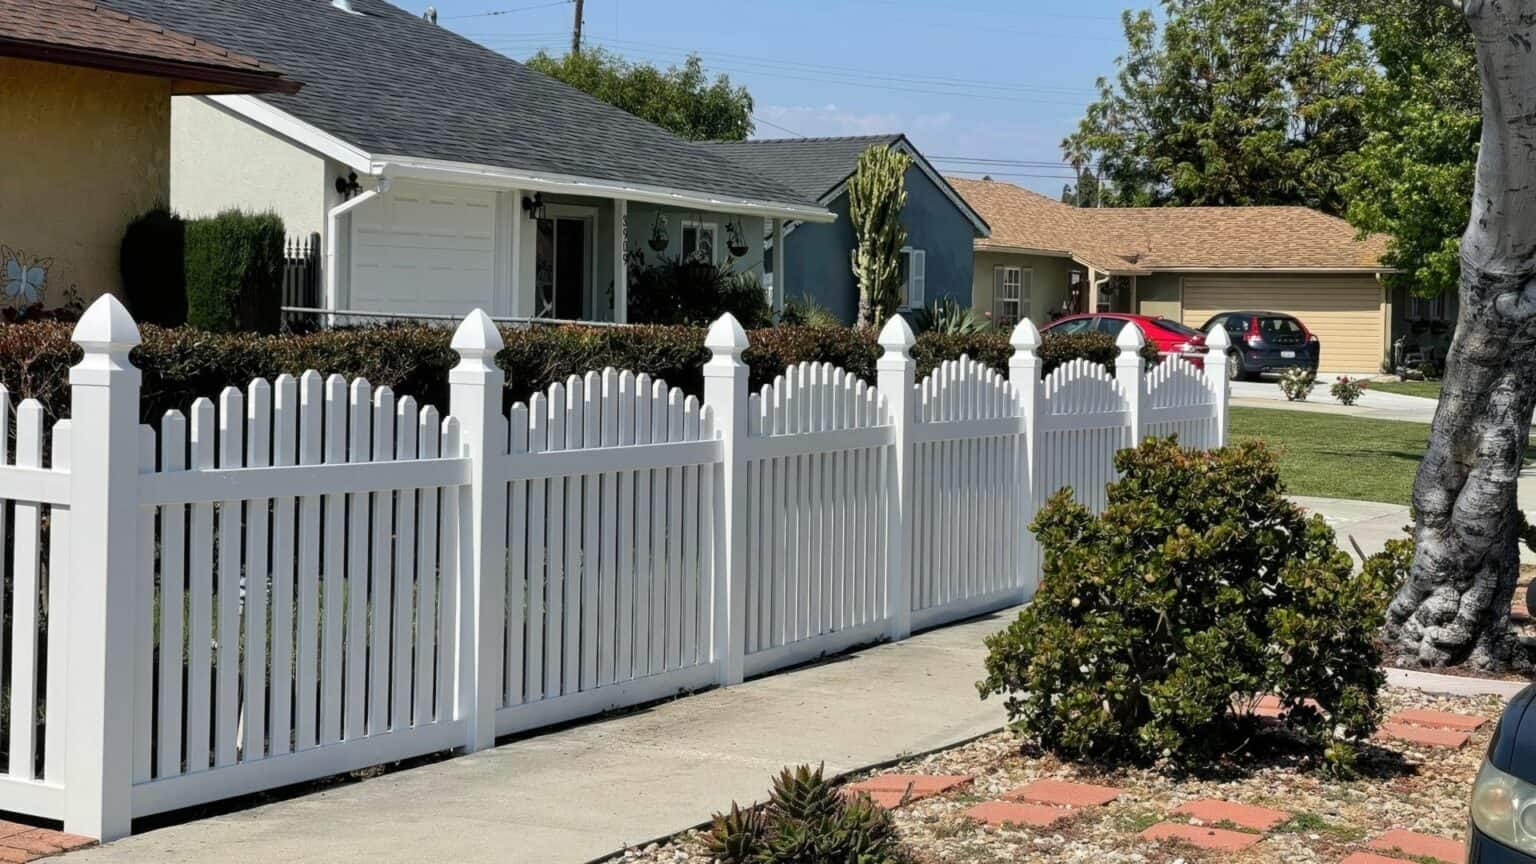 Vinyl arched picket fence & brick driveway. Houses stand in the background as a concrete sidewalk completes the scene.